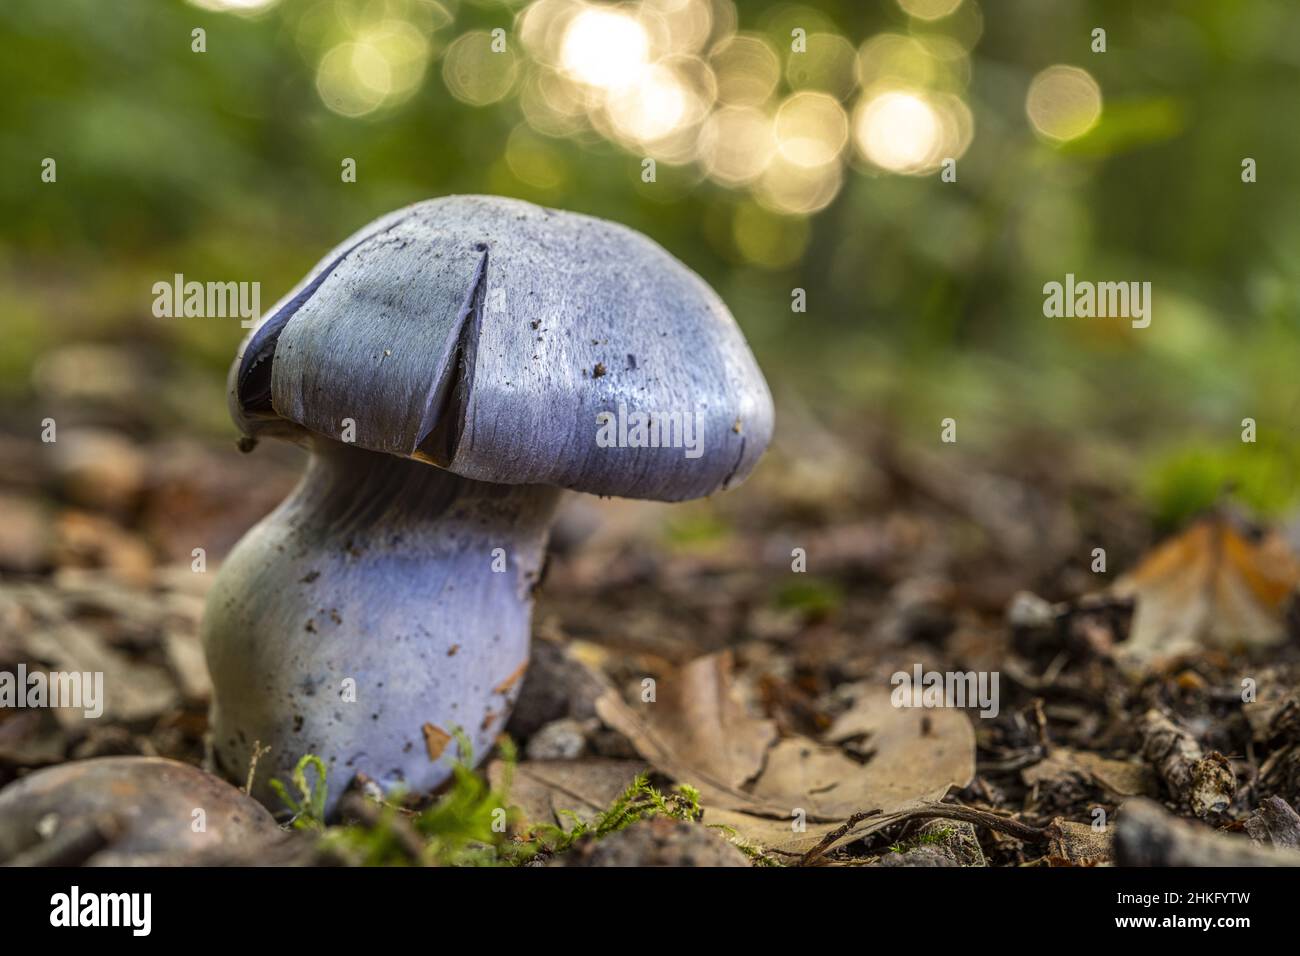 France, Somme, Crécy-en-Ponthieu, Crécy forest, Mushroom, Cortinarius violaceus Stock Photo